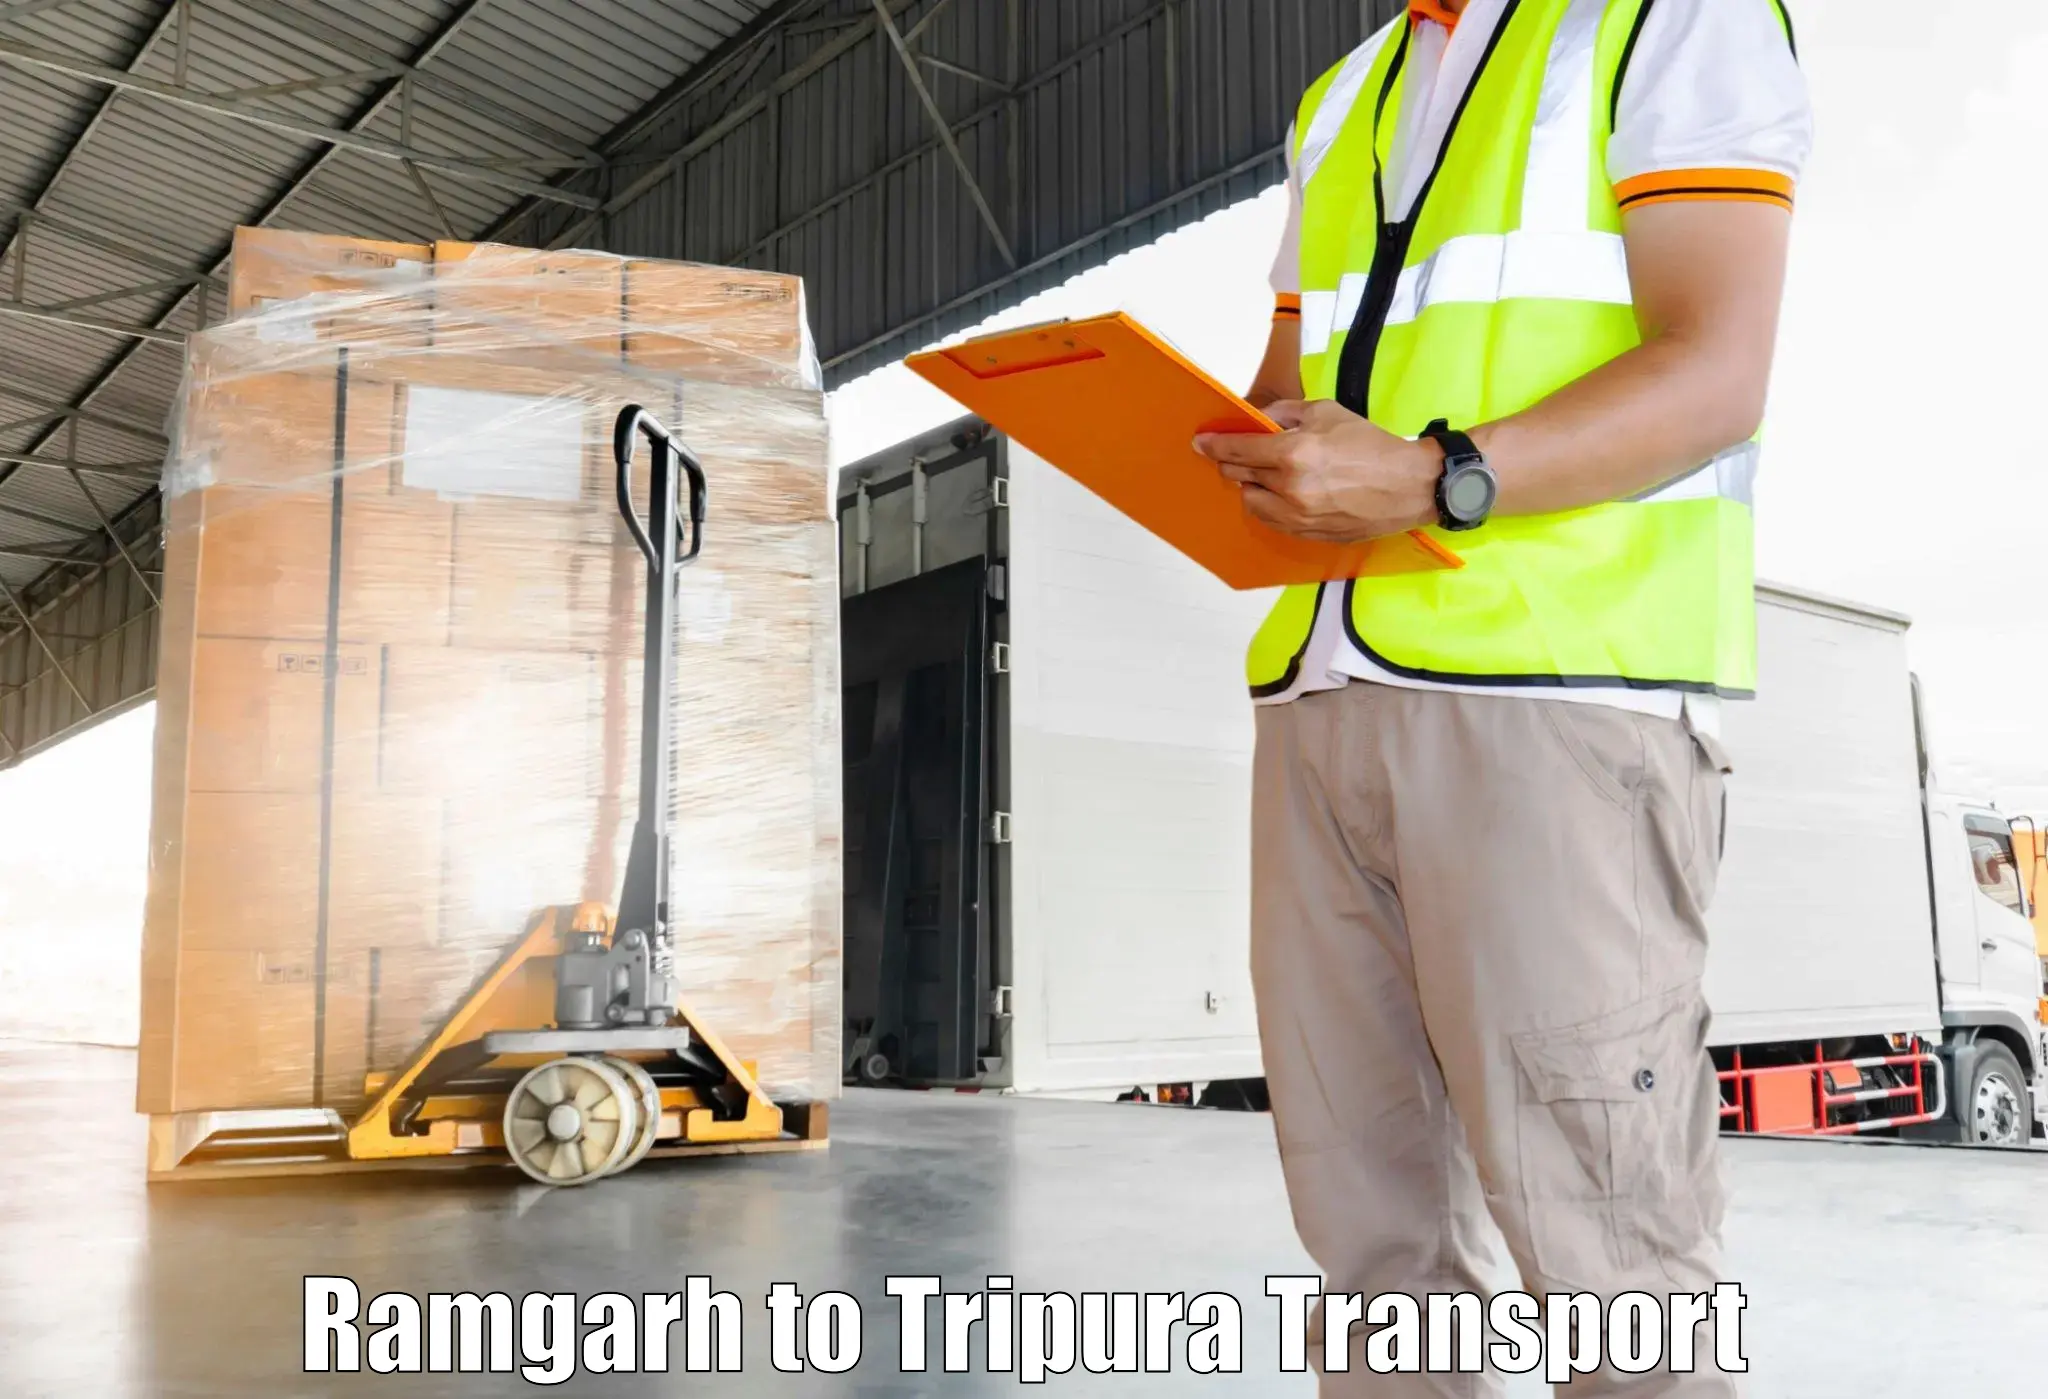 Delivery service Ramgarh to Udaipur Tripura